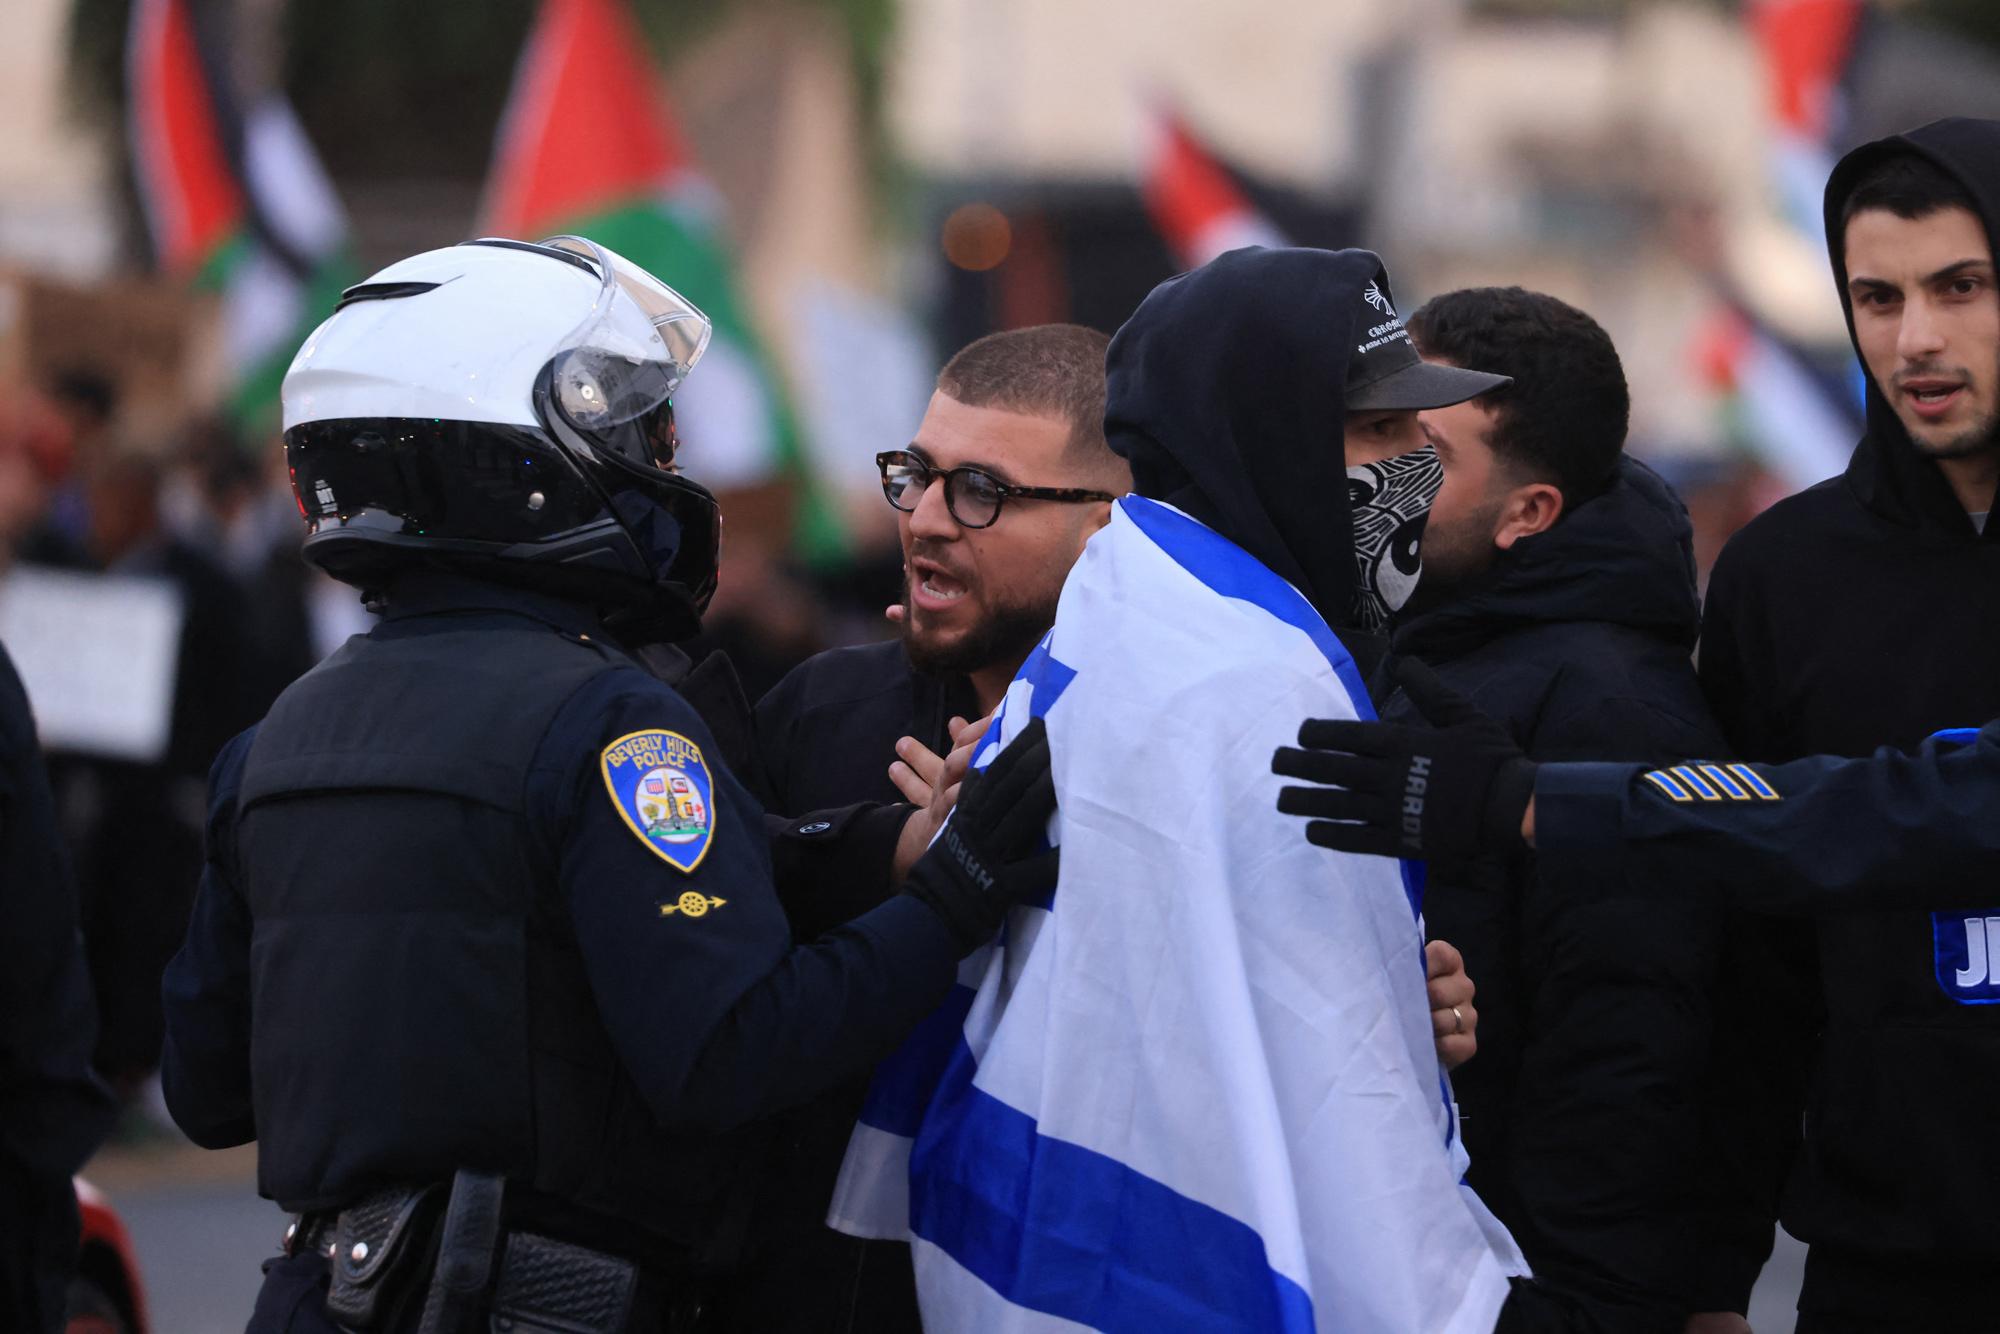 Police officers control an interaction between Israeli counter protesters as pro-Palestinian protesters rally during the "Black & Palestinian Solidarity for a Ceasefire this Xmas" by the Beverly Center shopping center in Los Angeles on December 23.